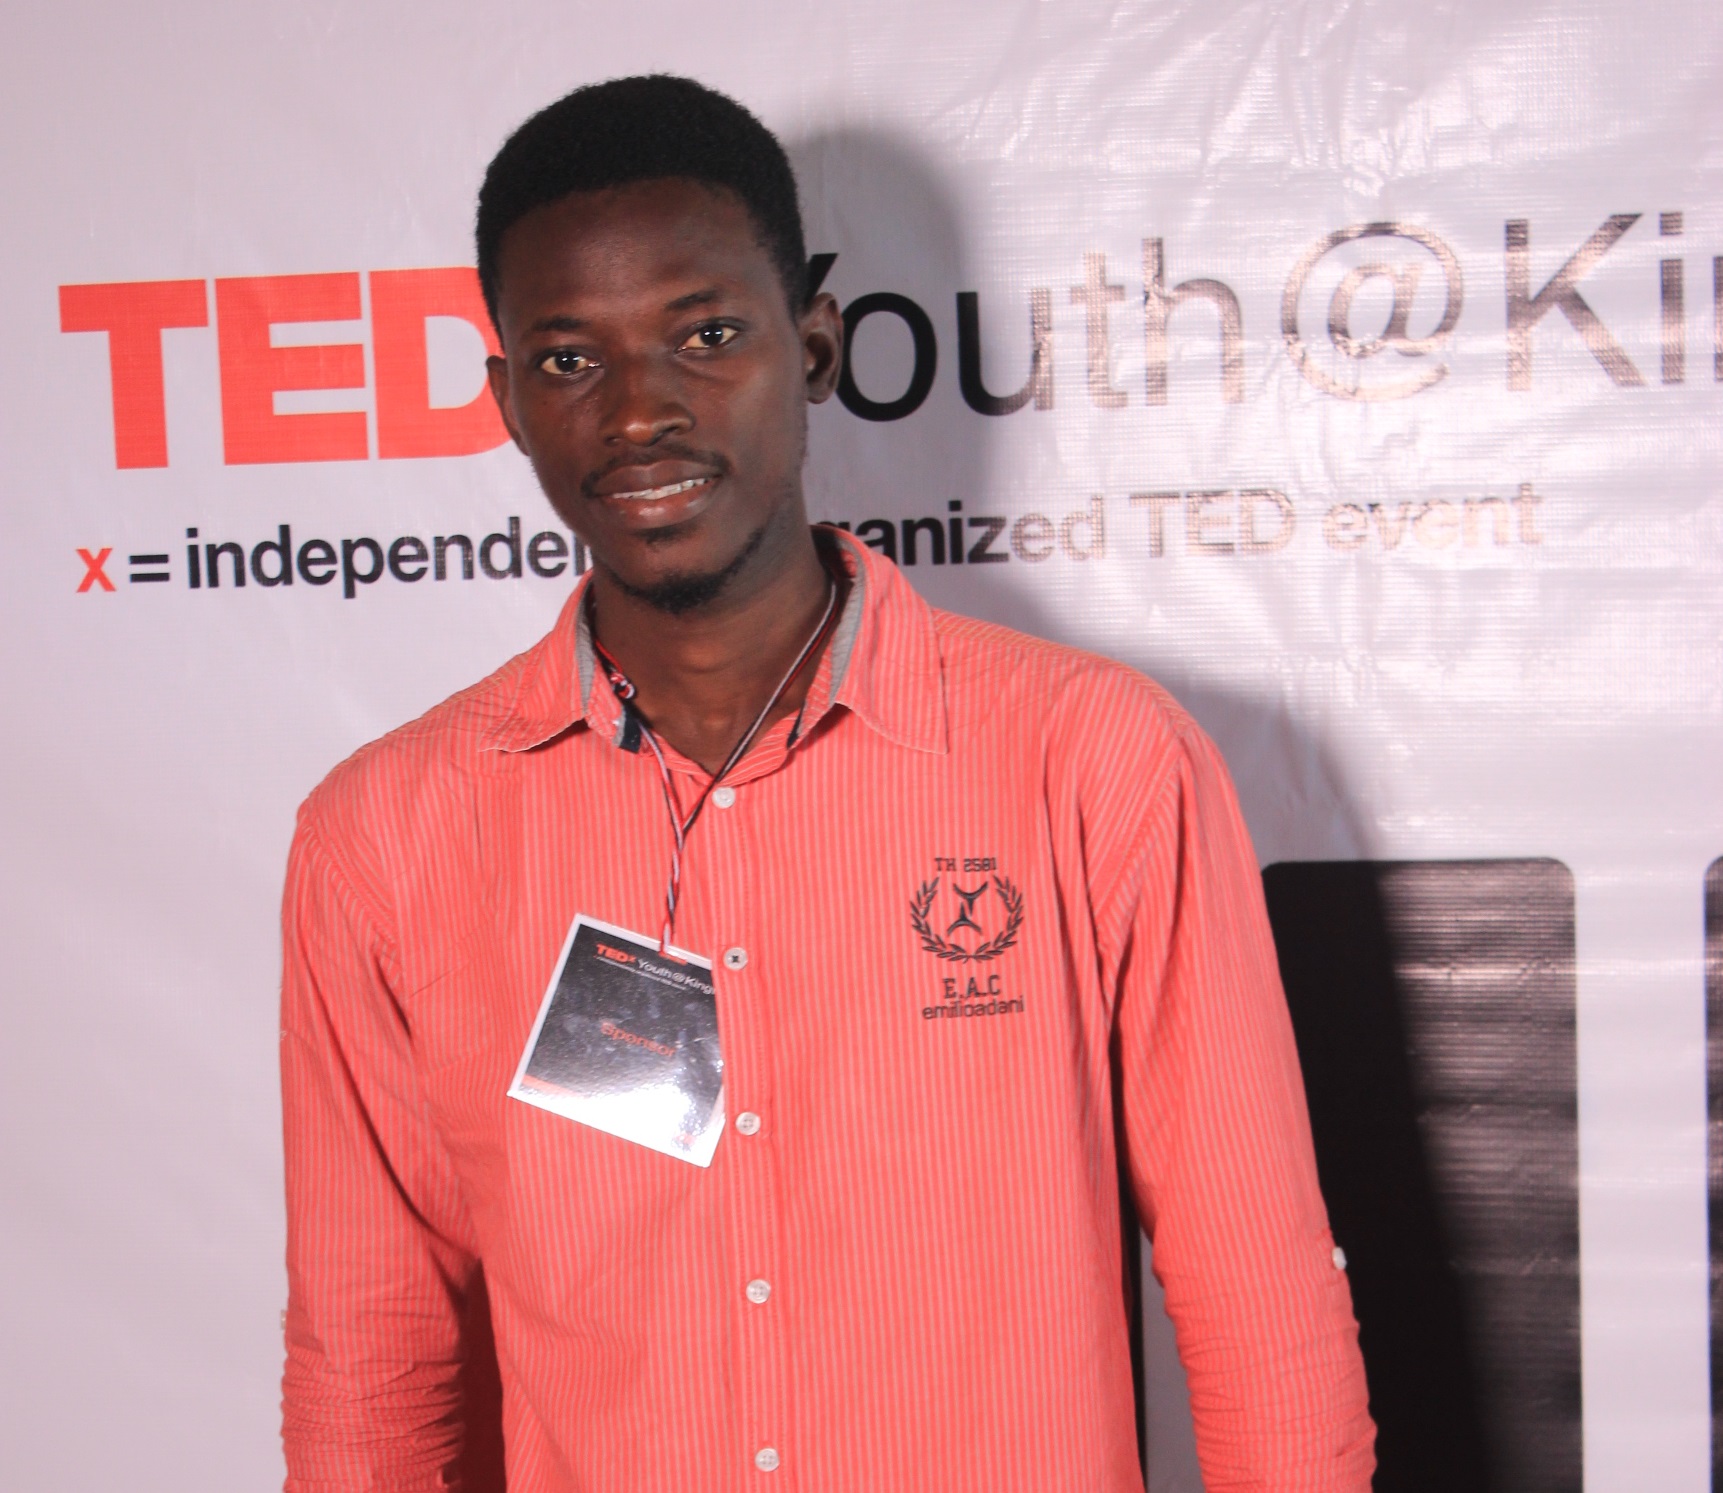 Tedx youth 